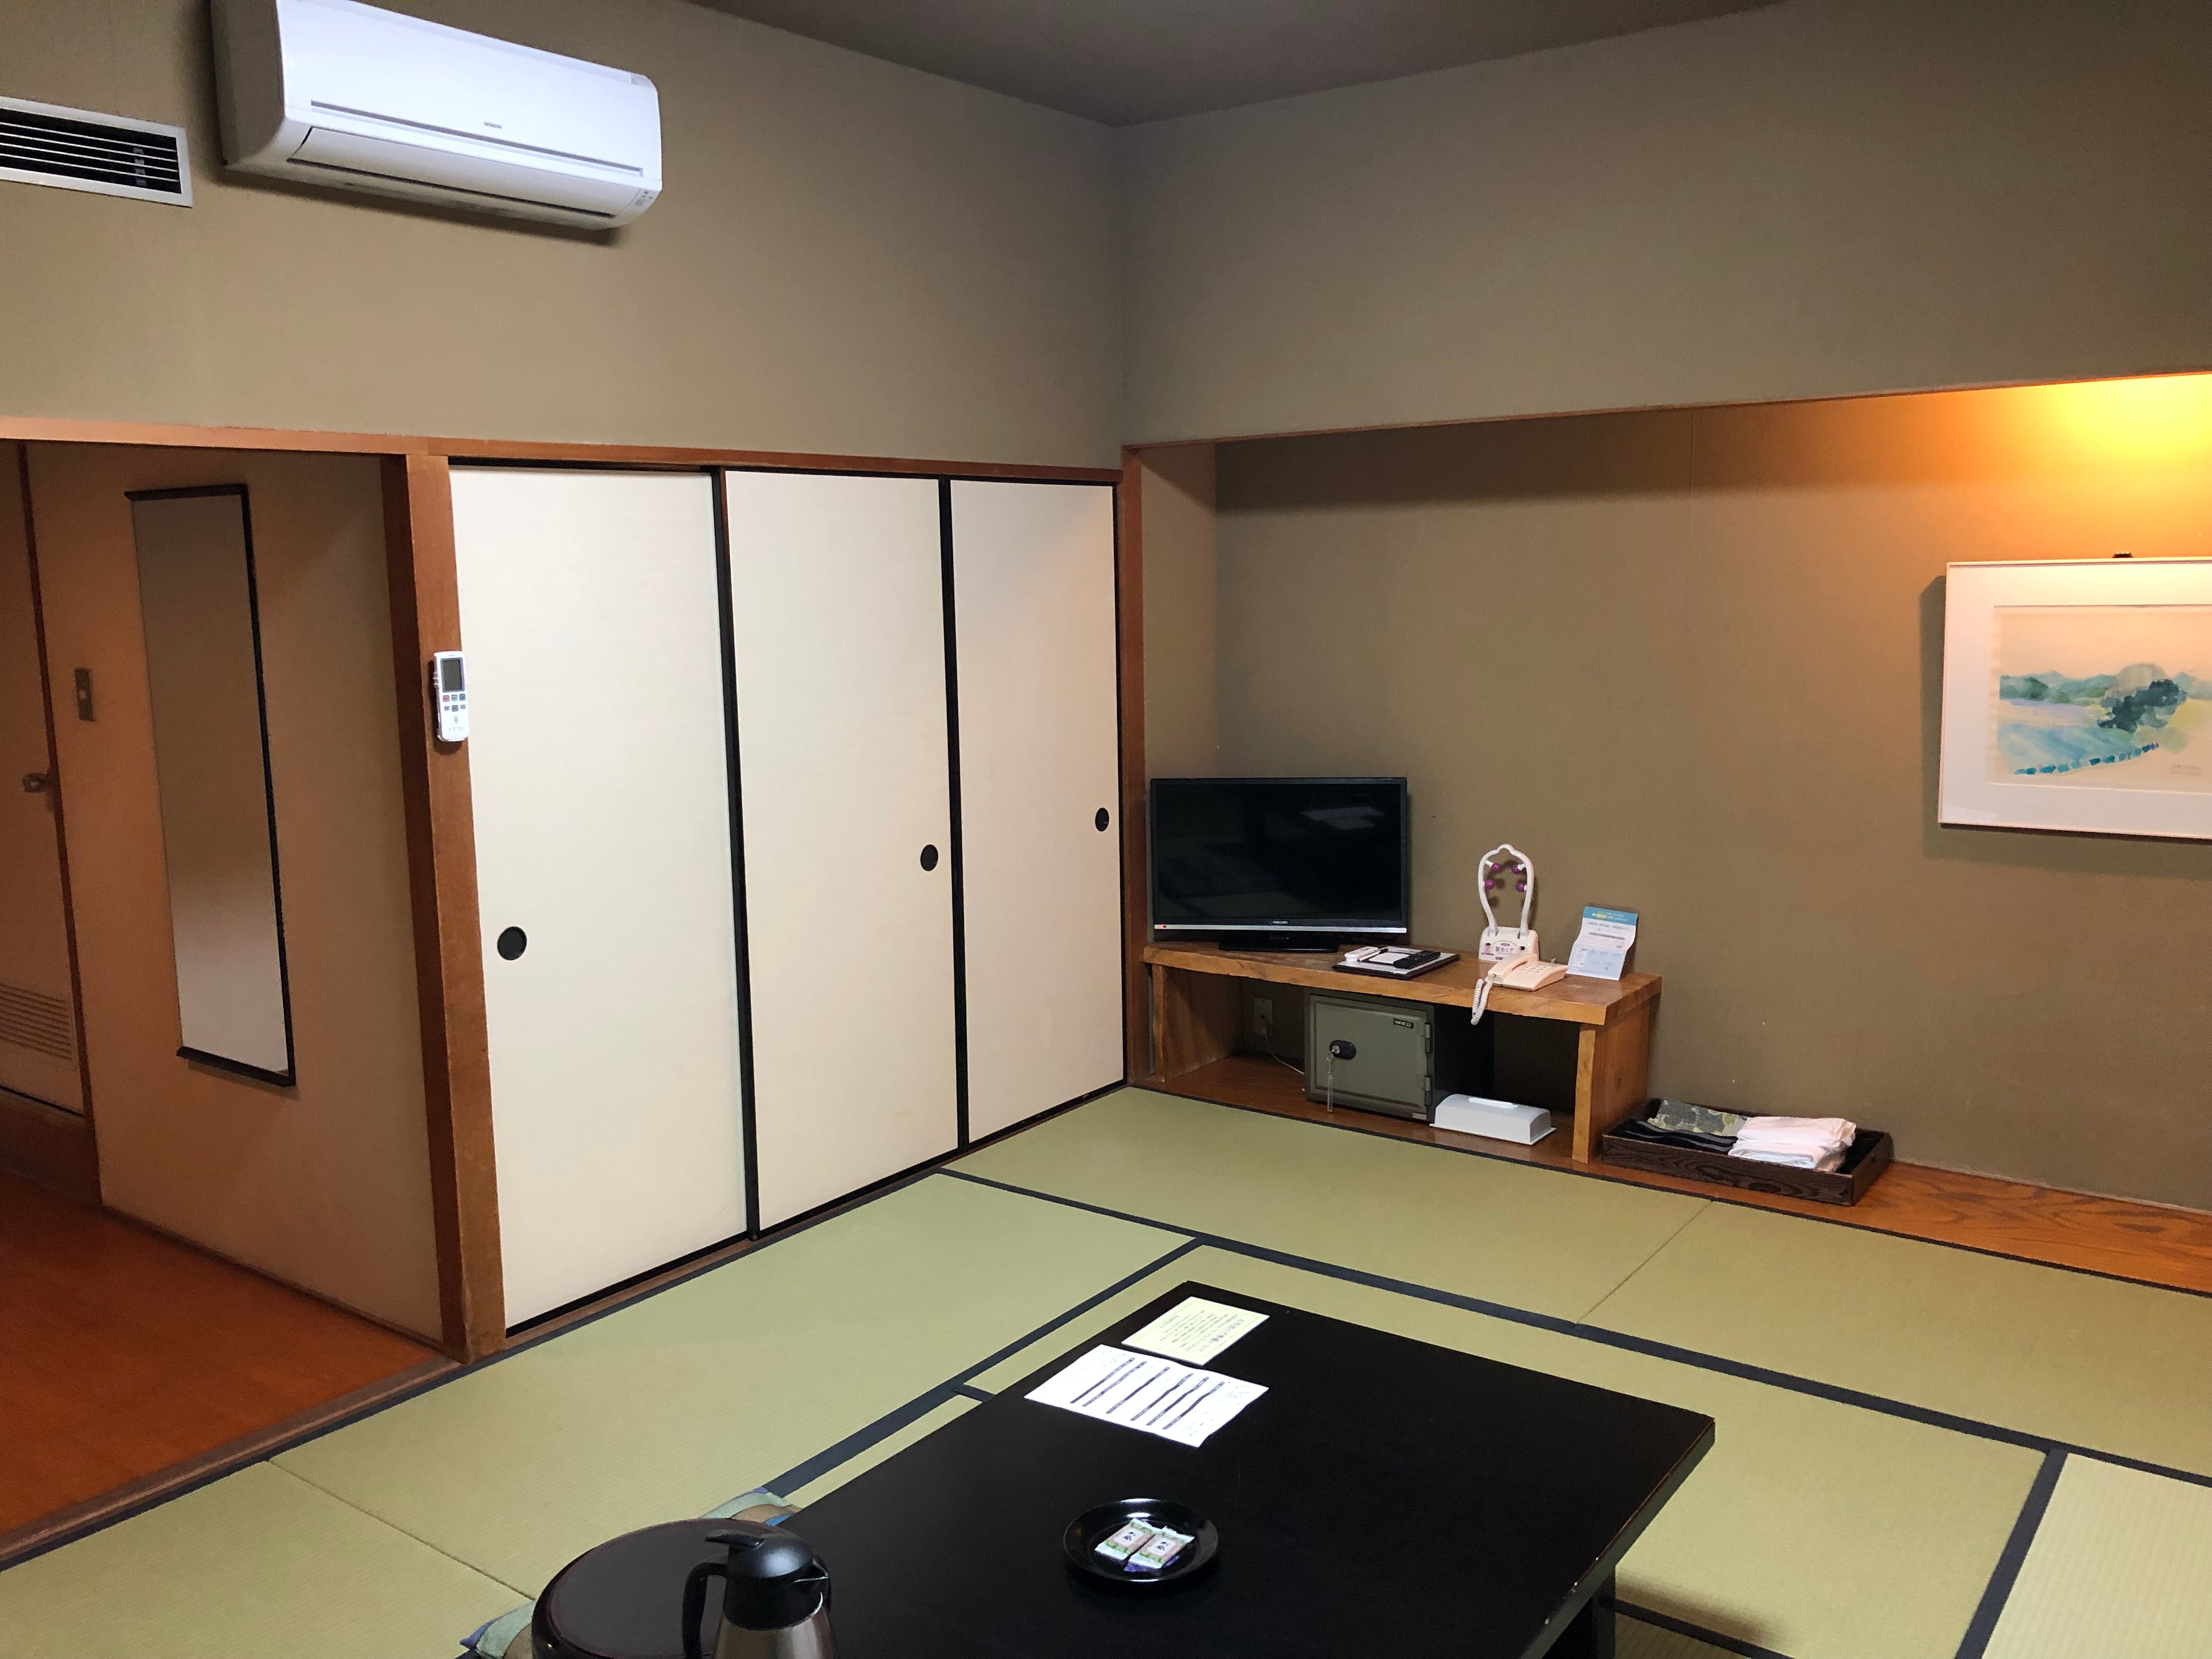 Main building Japanese-style room 10 tatami mats with wi-fi